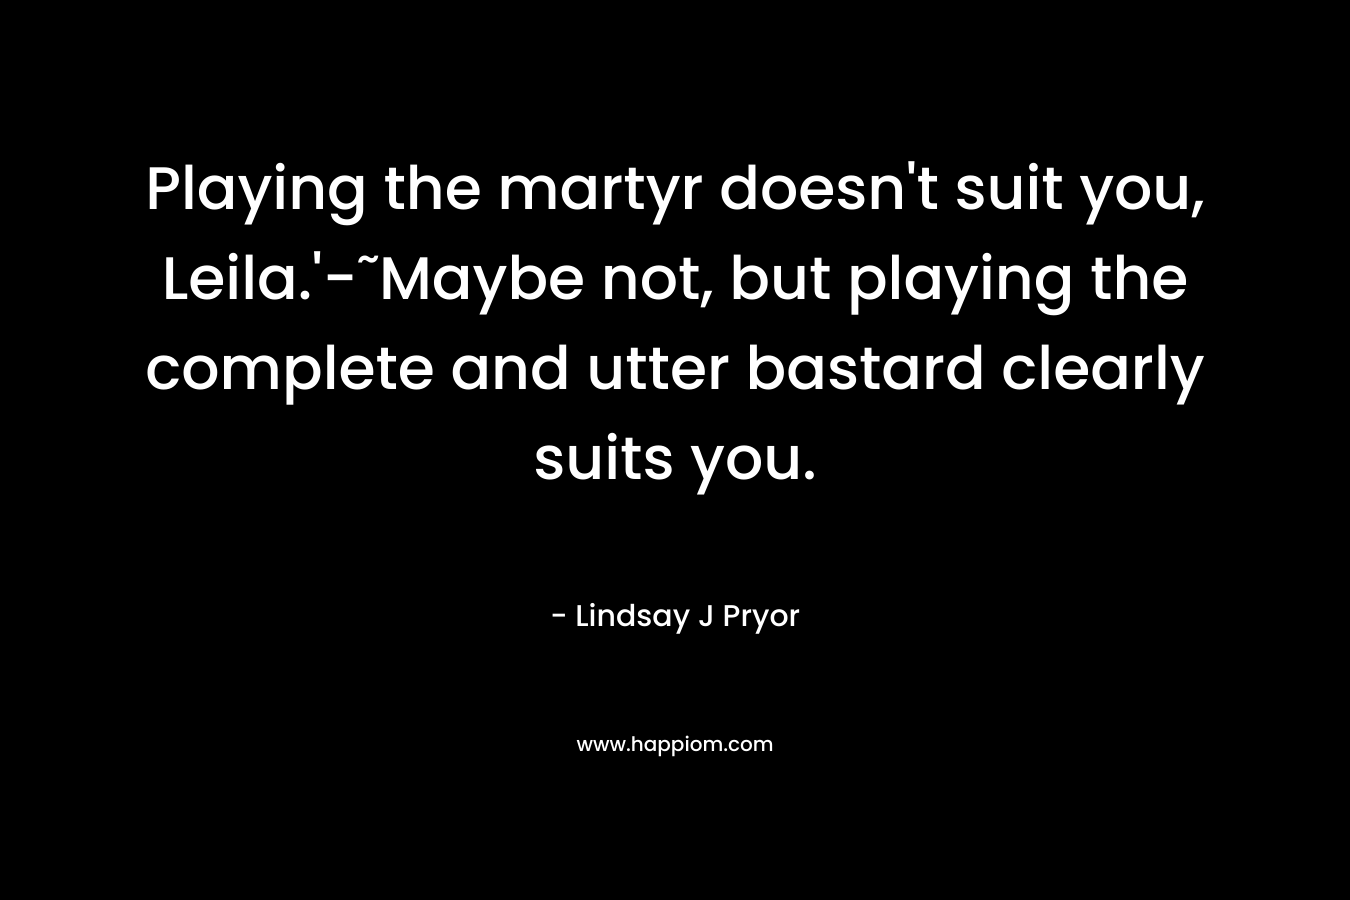 Playing the martyr doesn’t suit you, Leila.’-˜Maybe not, but playing the complete and utter bastard clearly suits you. – Lindsay J Pryor